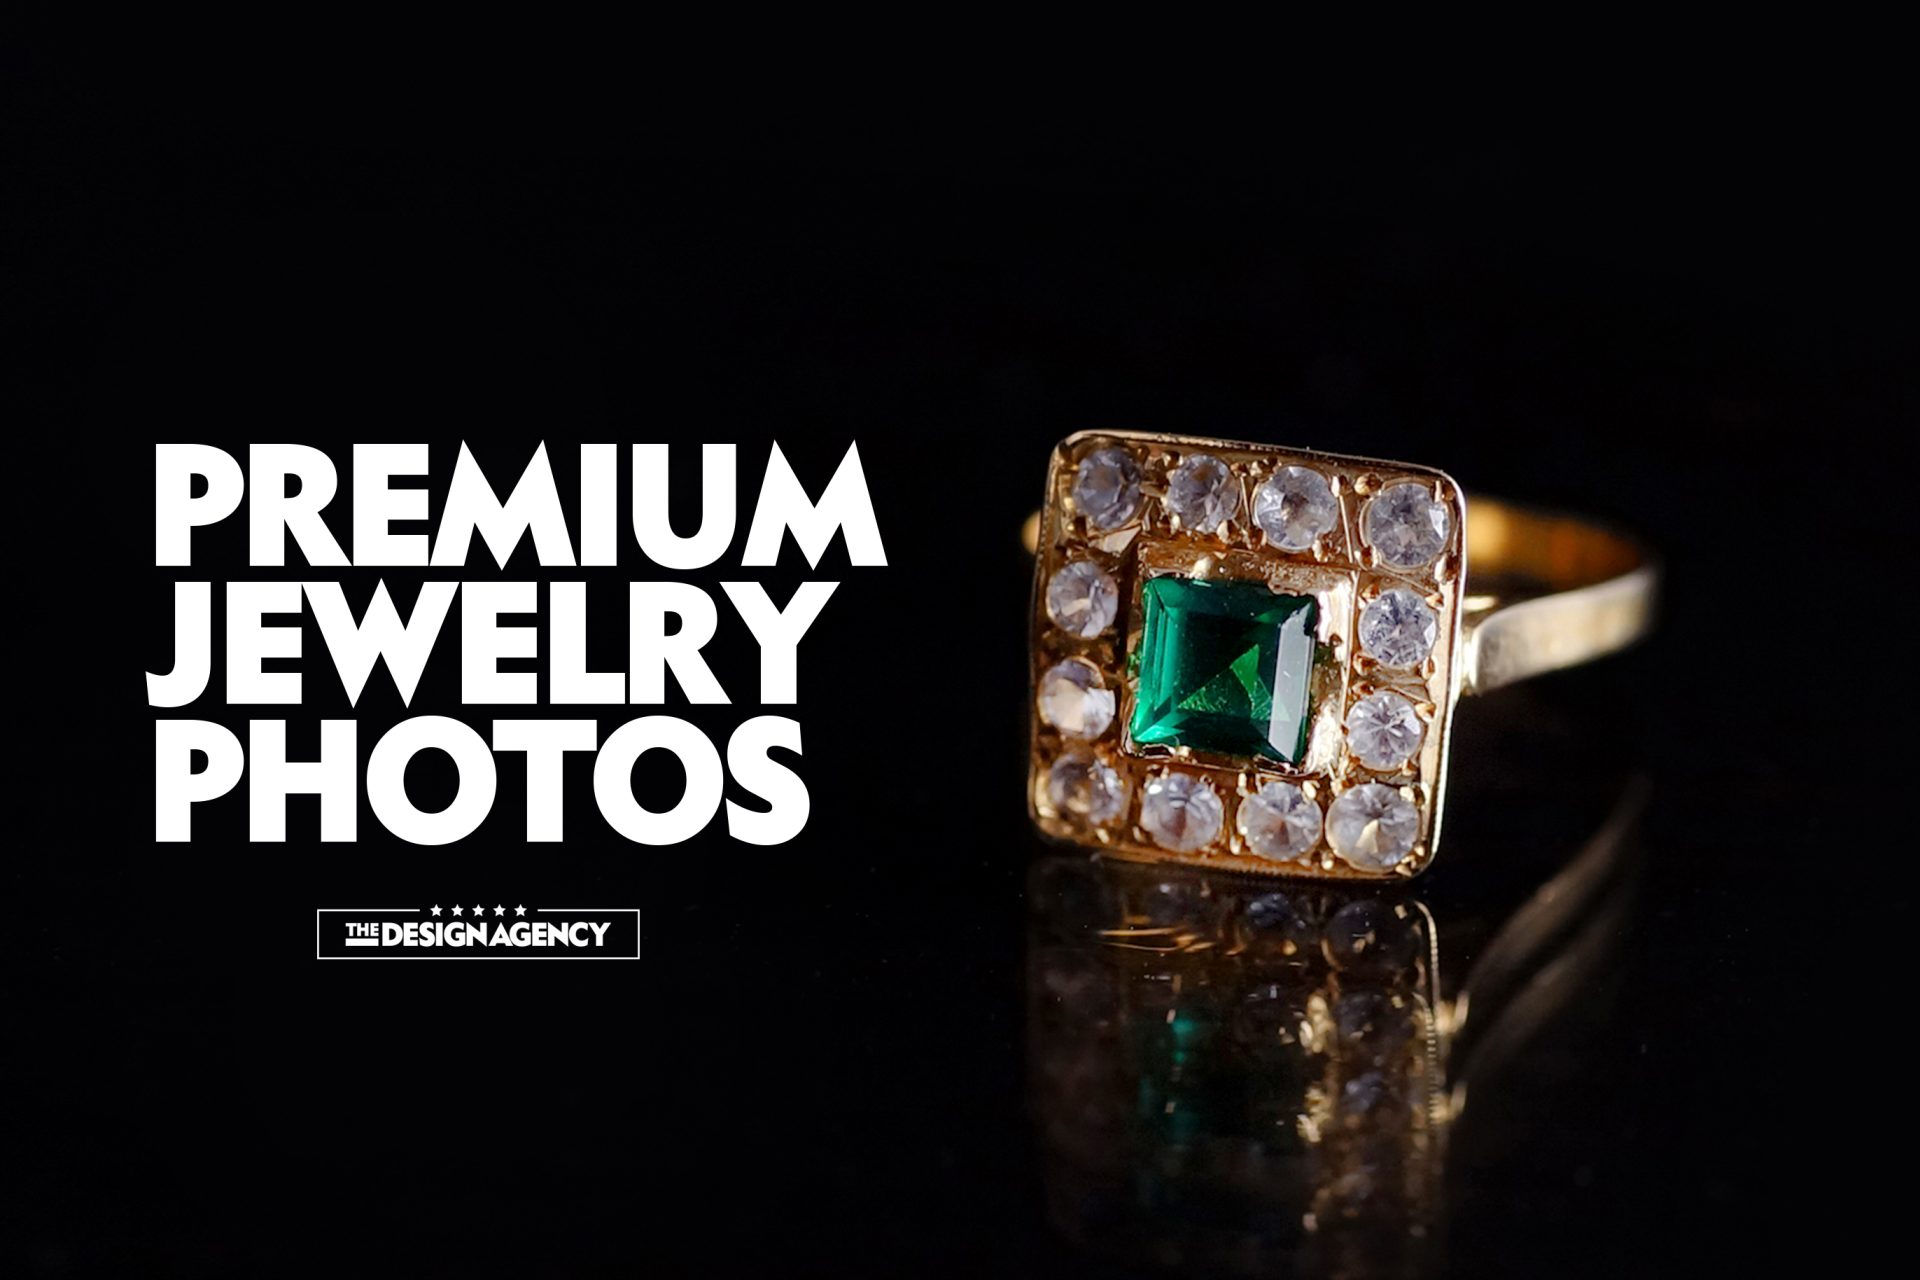 Vintage Premium Jewelry photography by George Pantool and the Design Agency